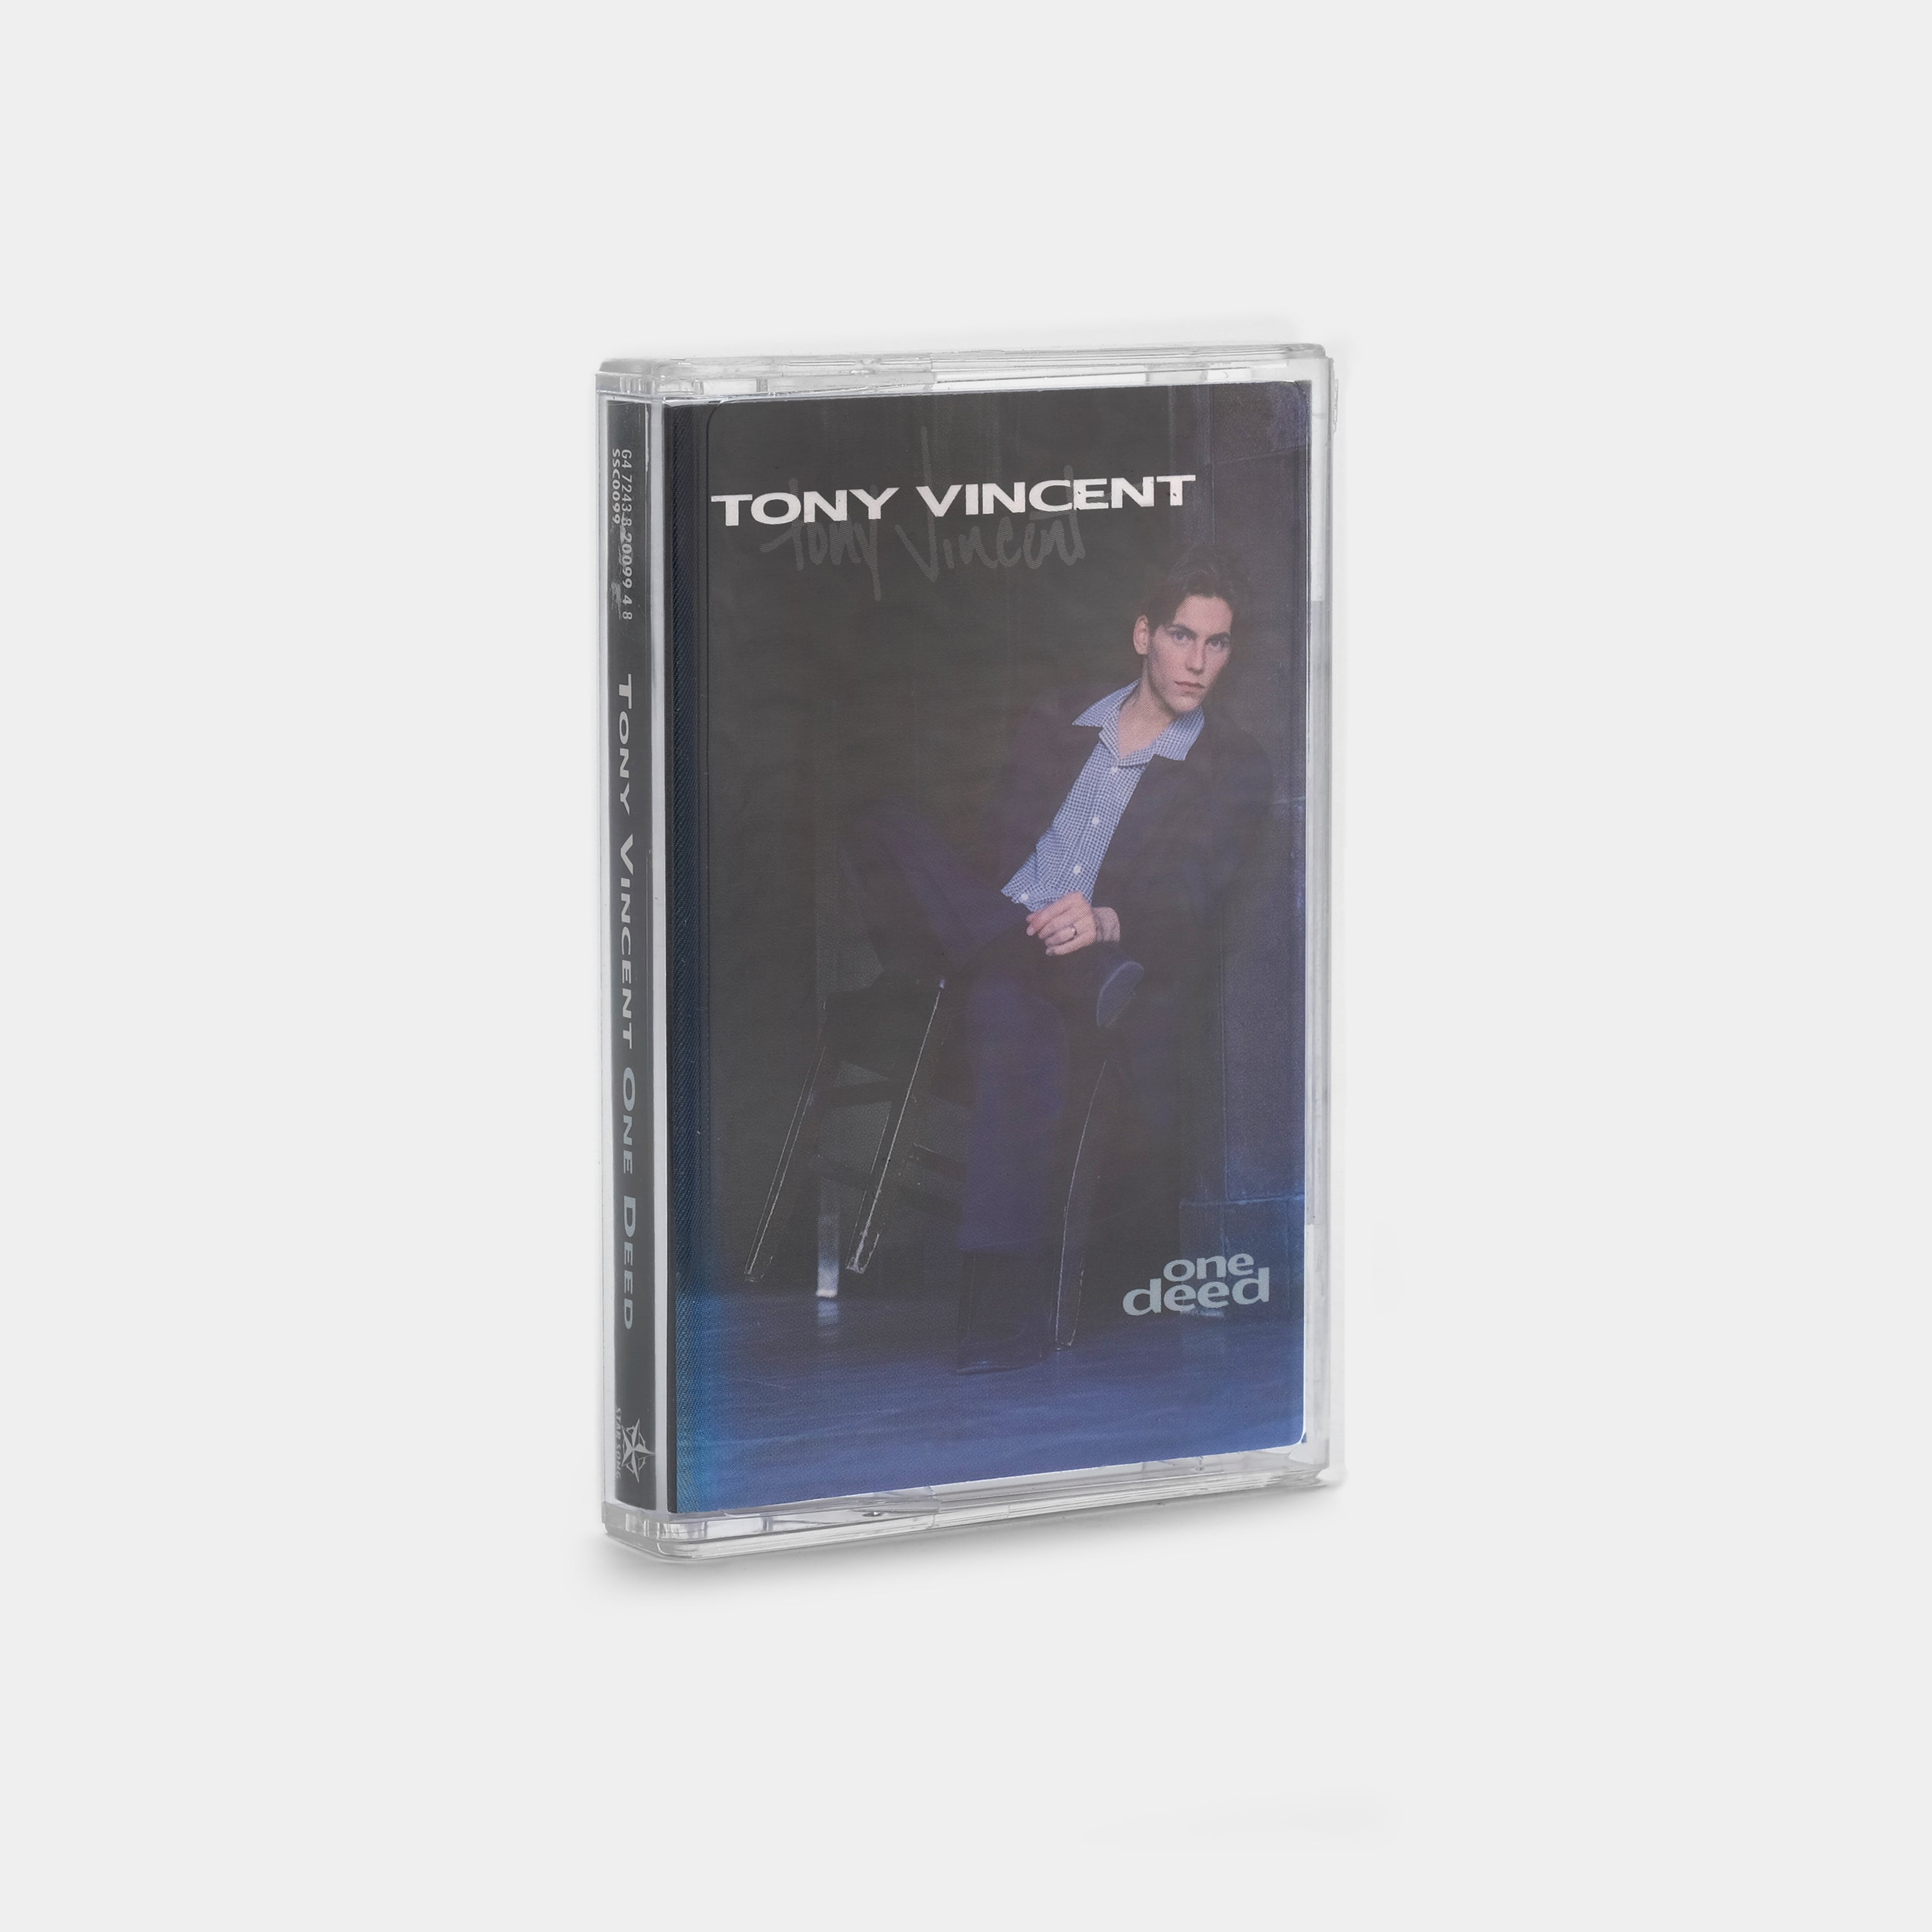 Tony Vincent - One Deed Cassette Tape